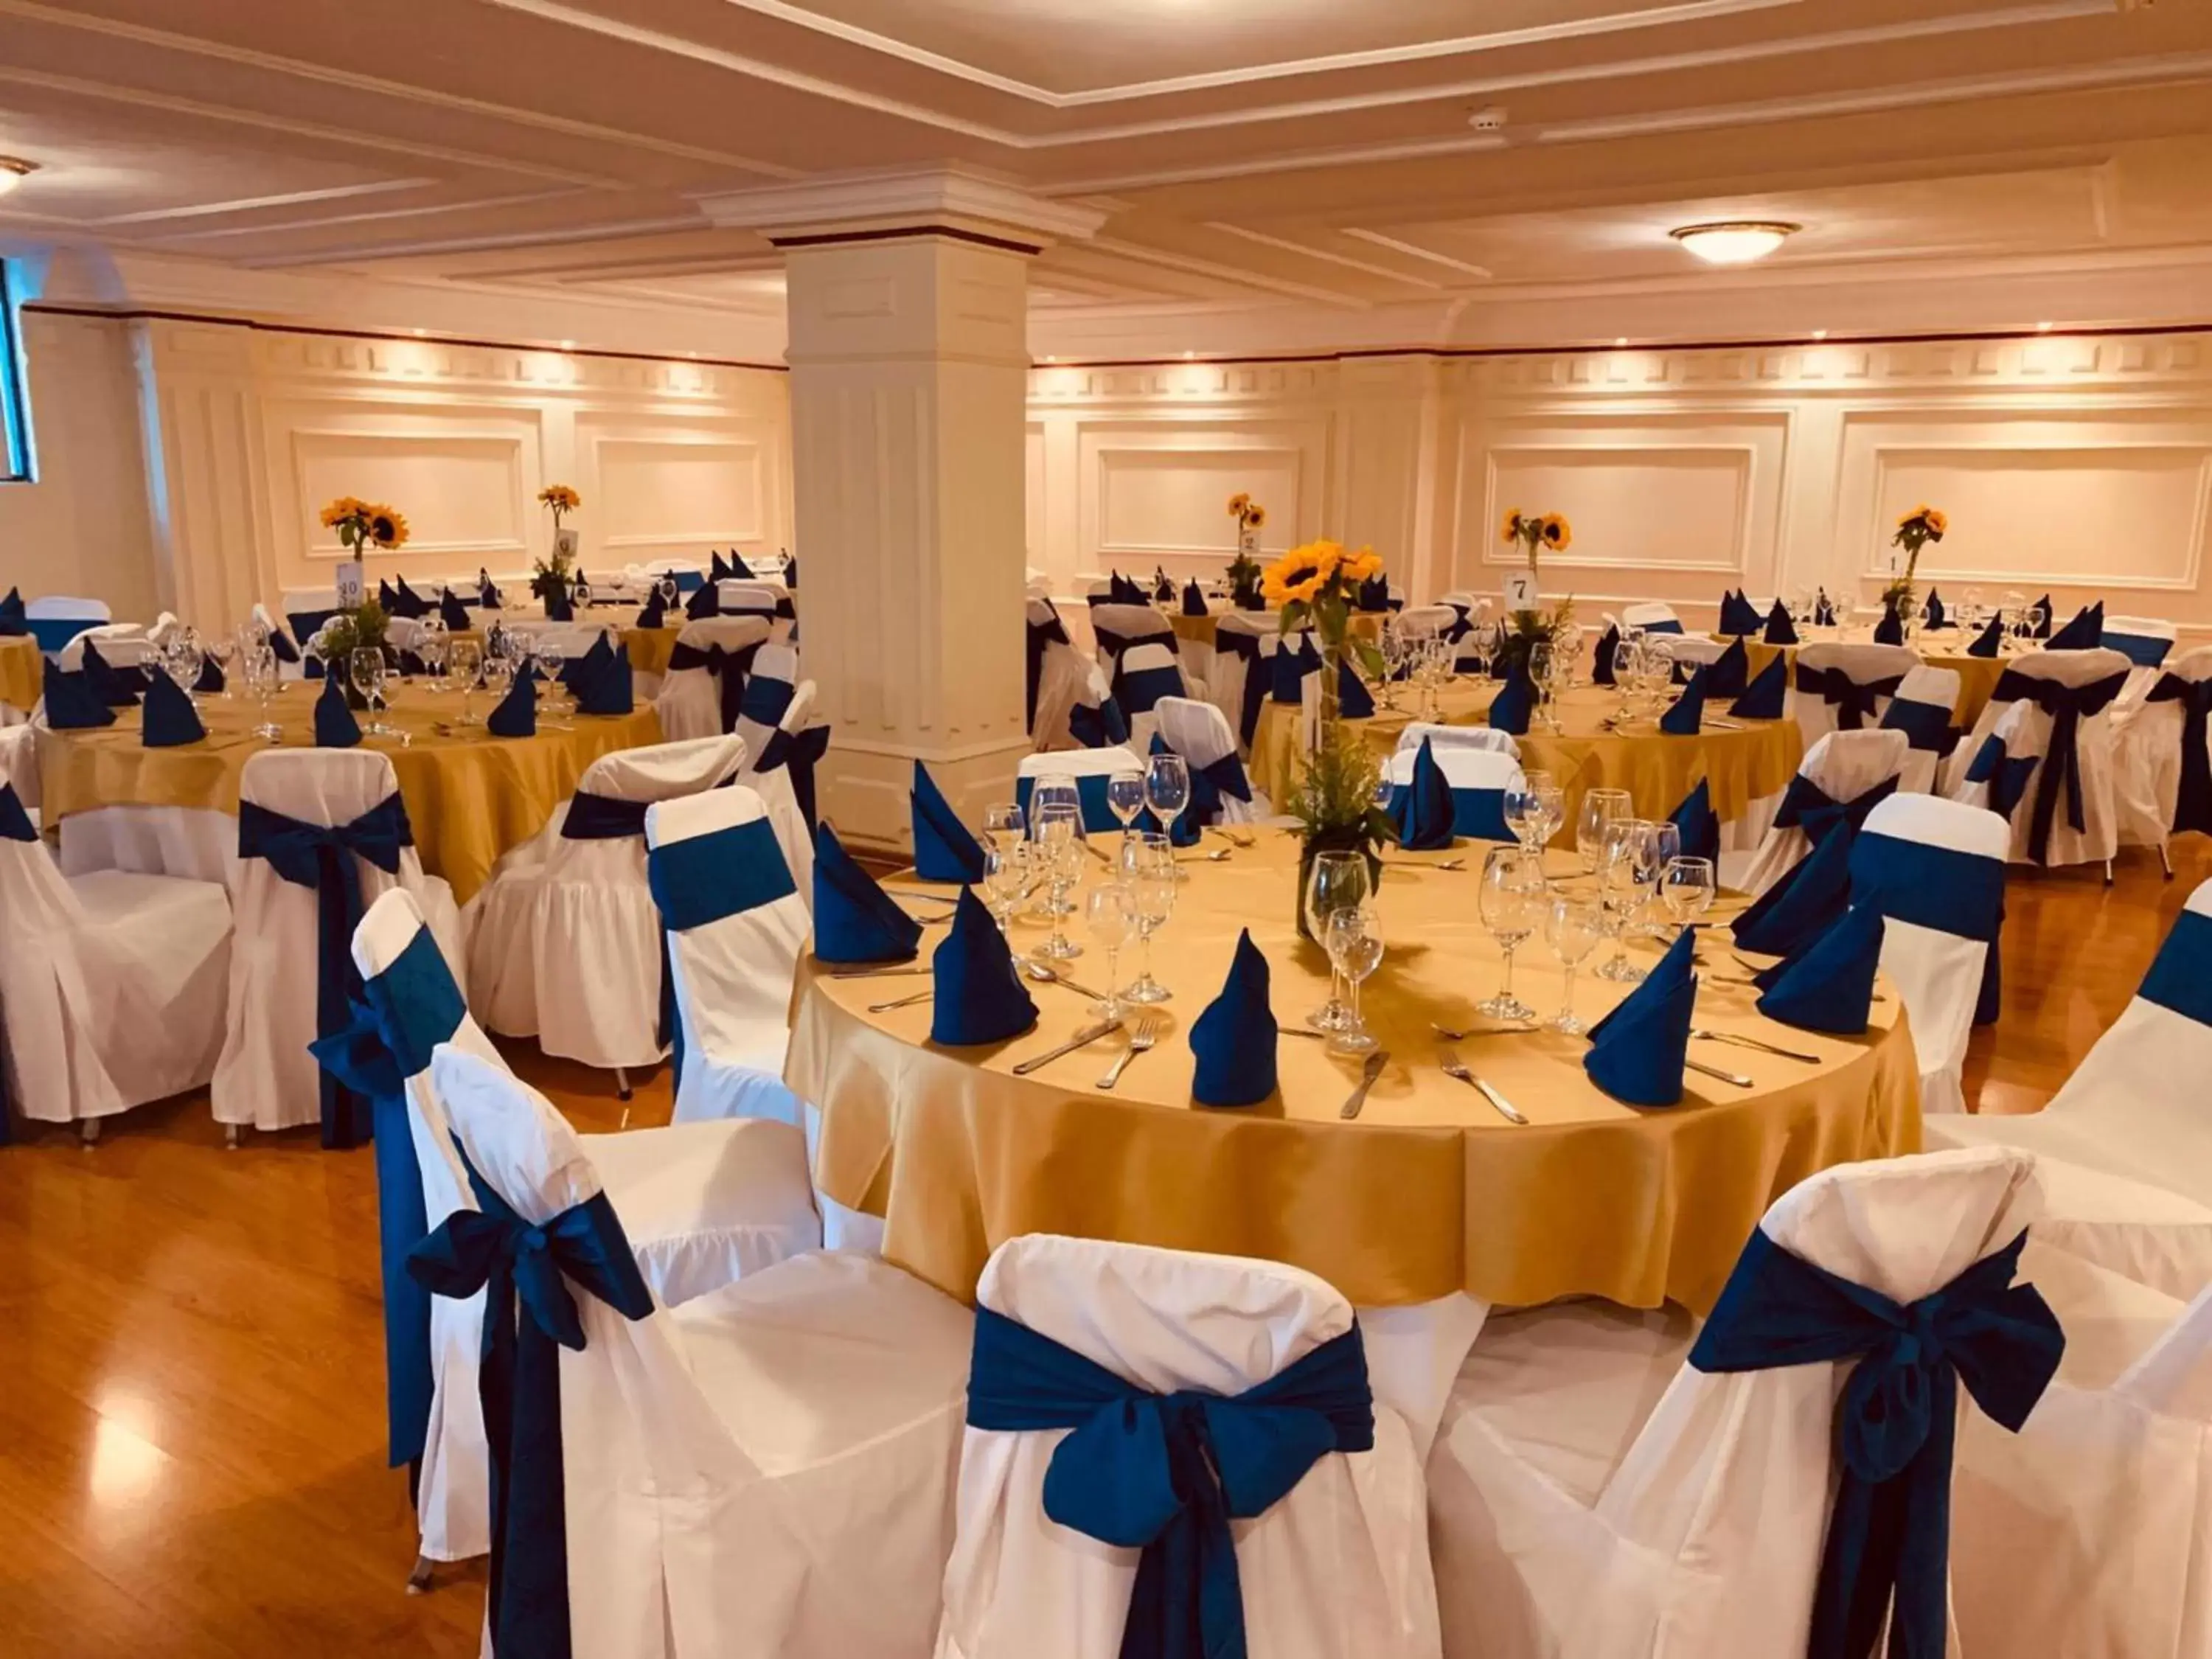 Place of worship, Banquet Facilities in Stanford Suites Hotel